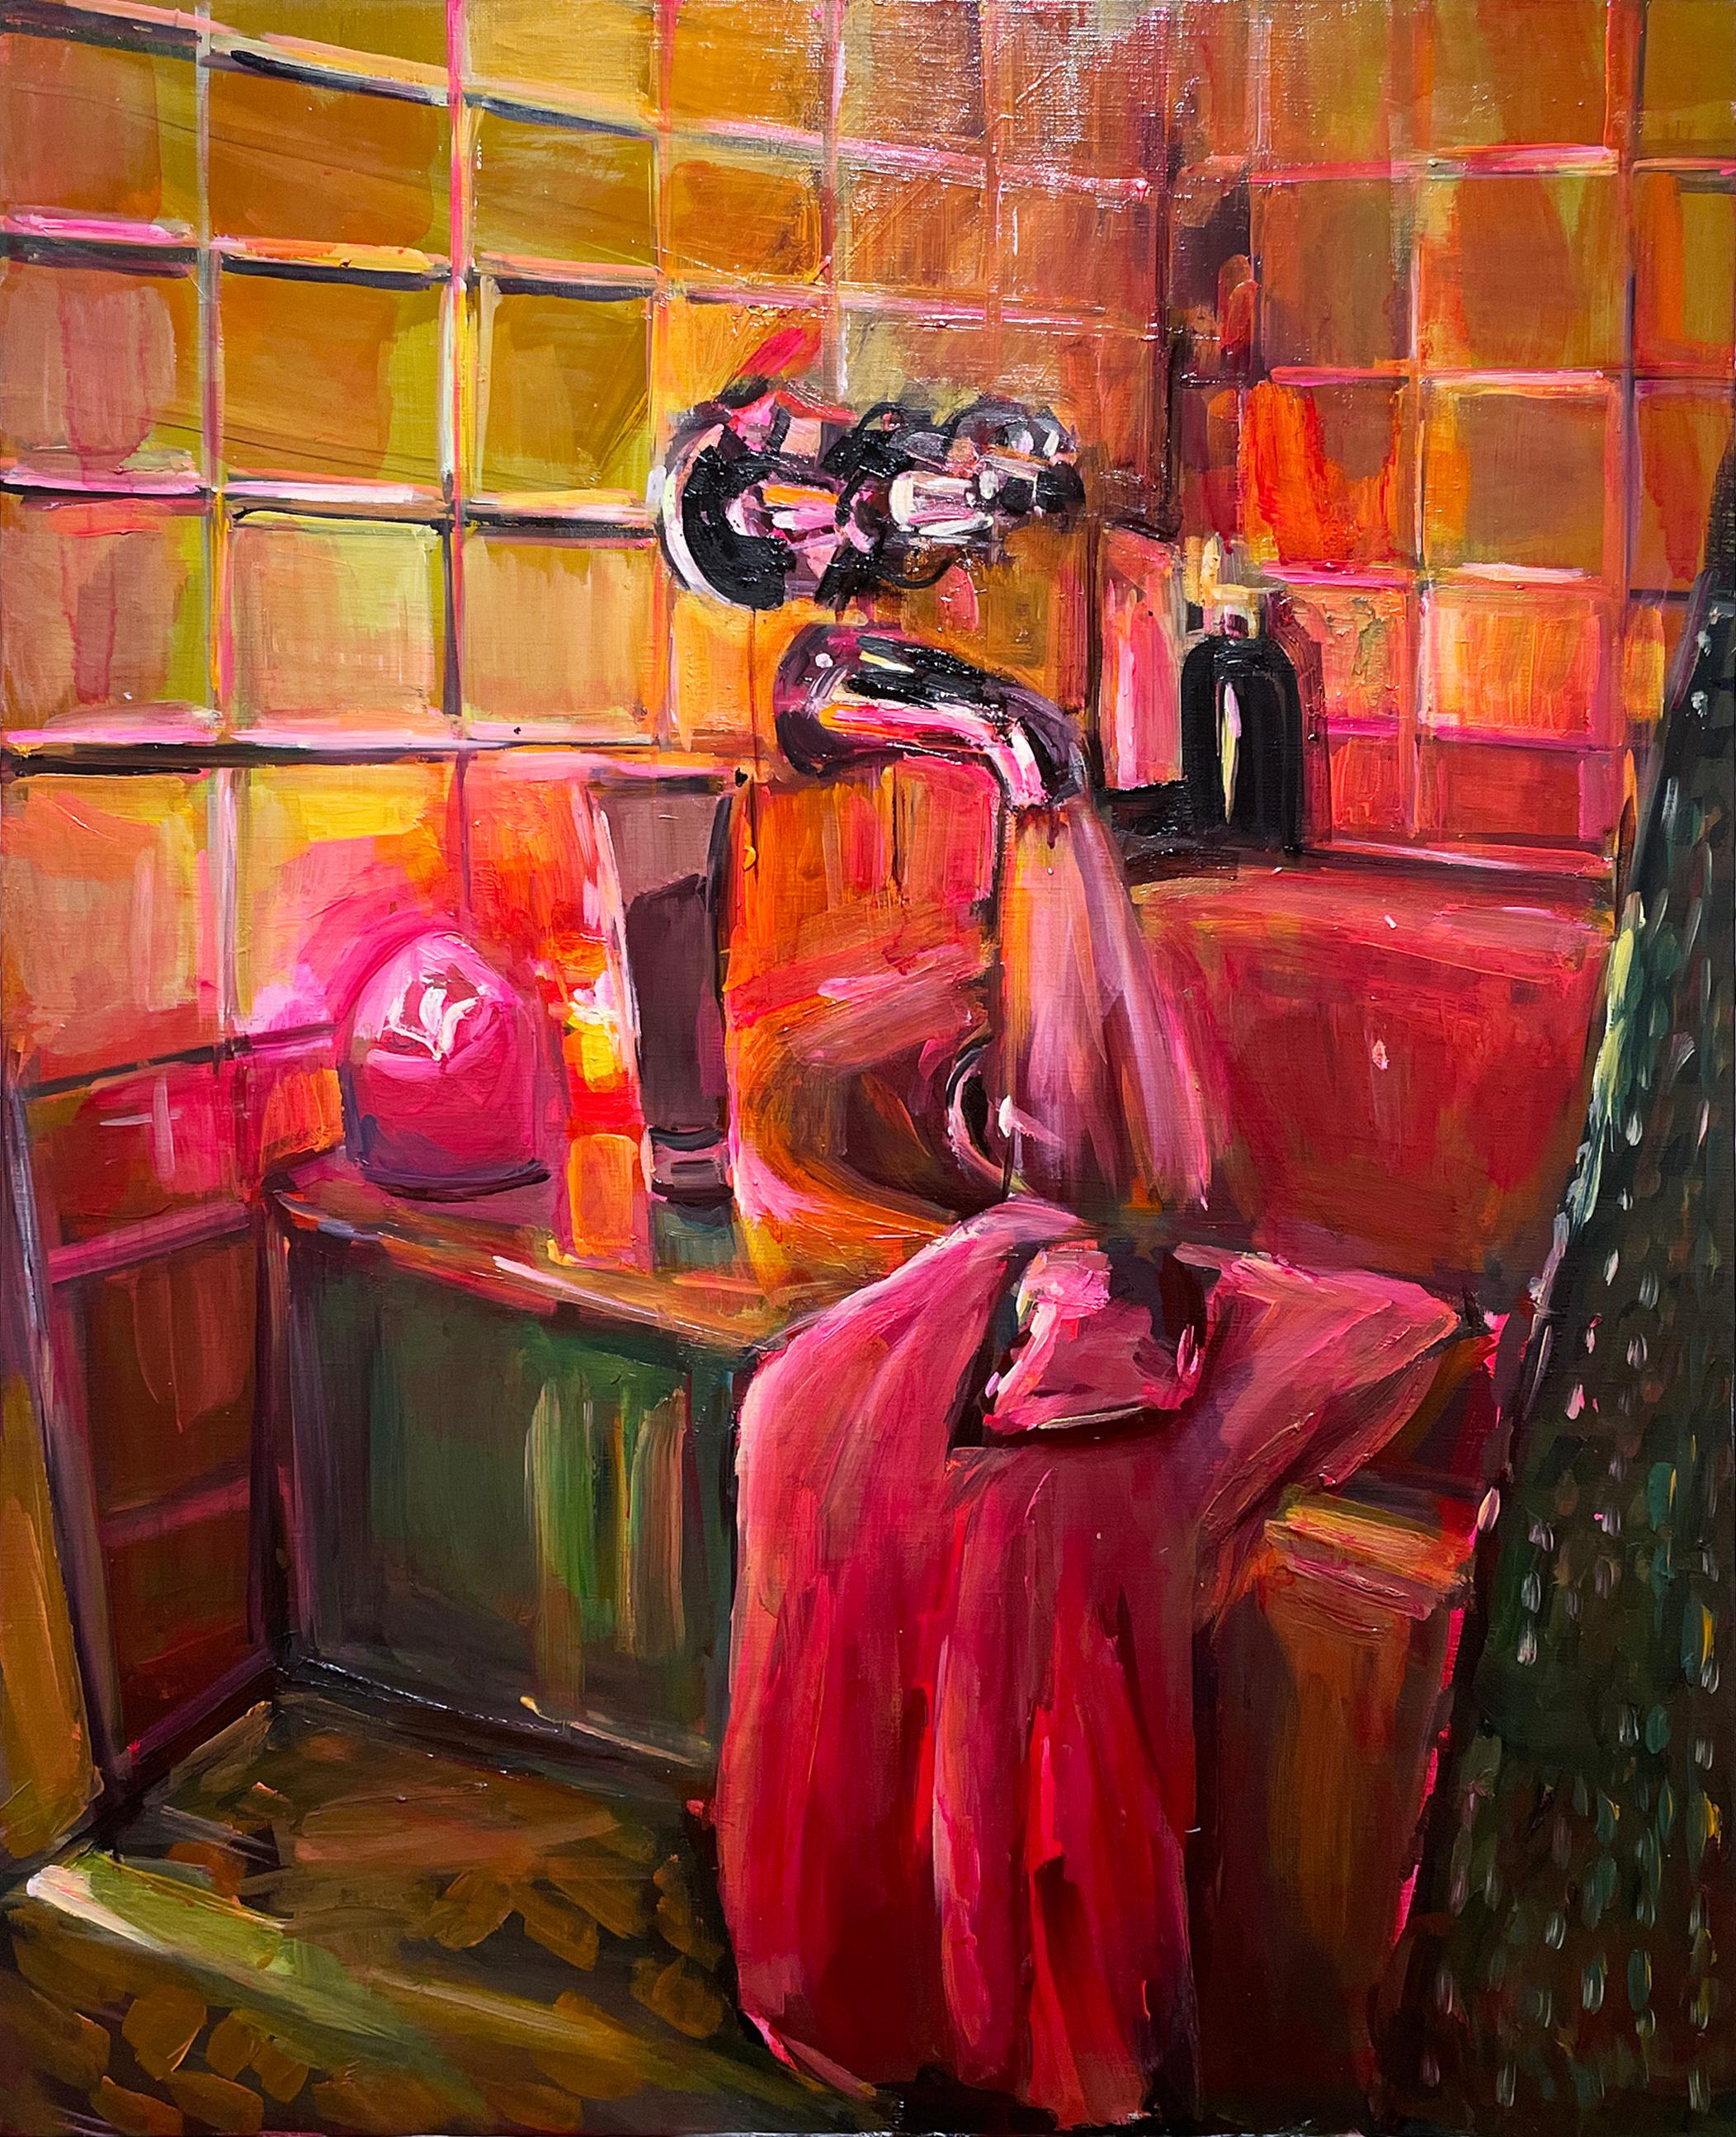 Ritual, oil on linen, impressionist interiors, bathtub, candlelight, hot pink